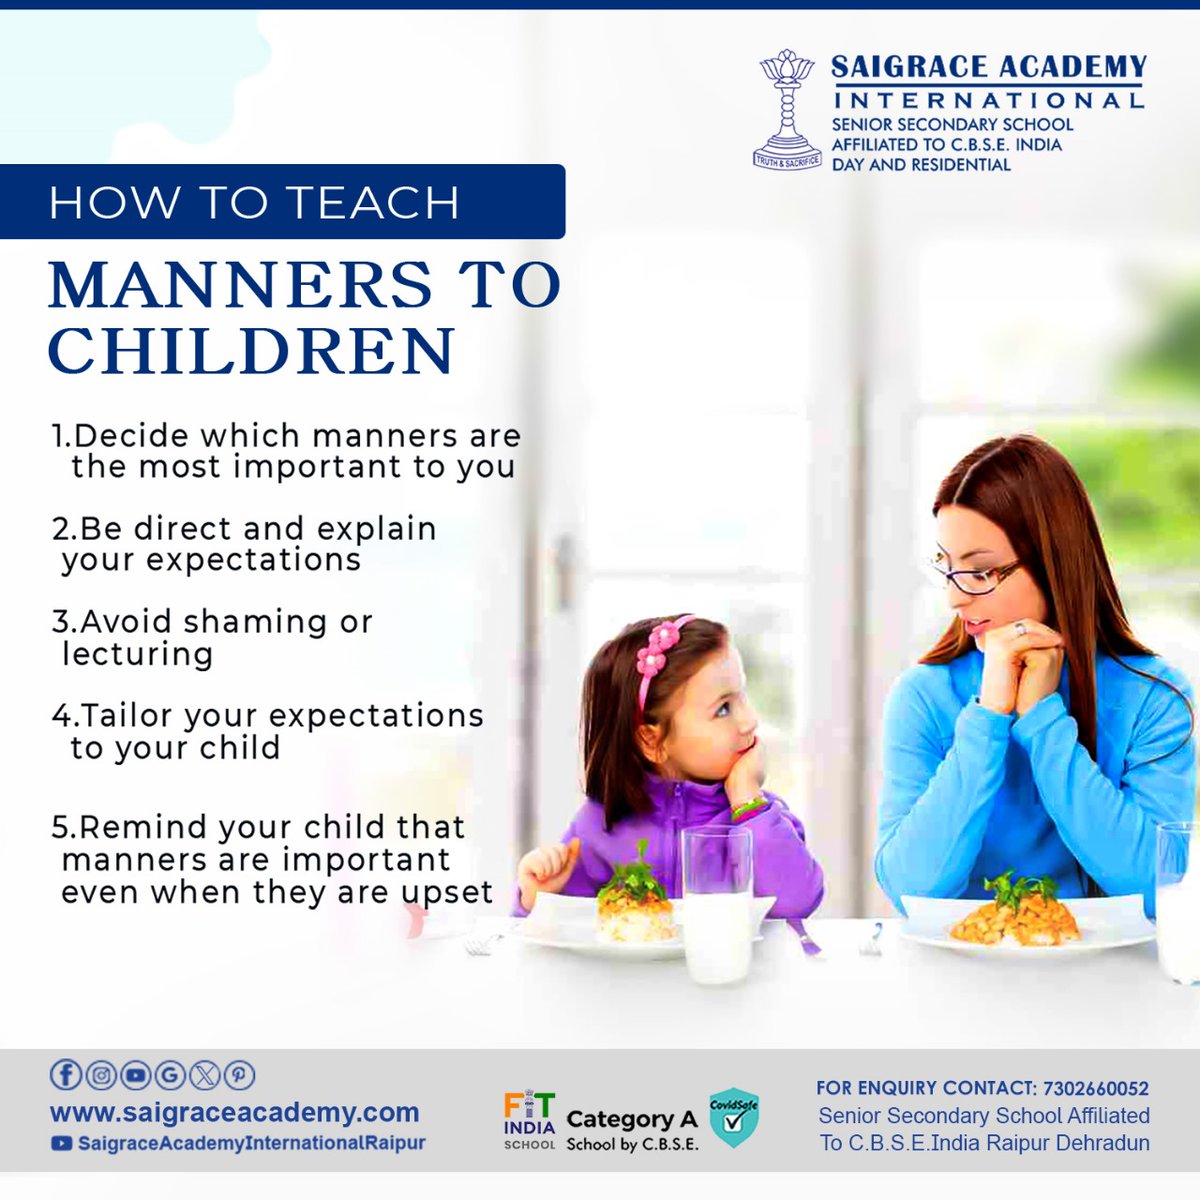 Teaching manners to children is crucial for their development. Remember to be direct, avoid shaming, and tailor your expectations to your child's needs.
.
#saigraceinternationalschool #childdevelopment #bestschoolnearme #manners #studentlearning #studentgrowth